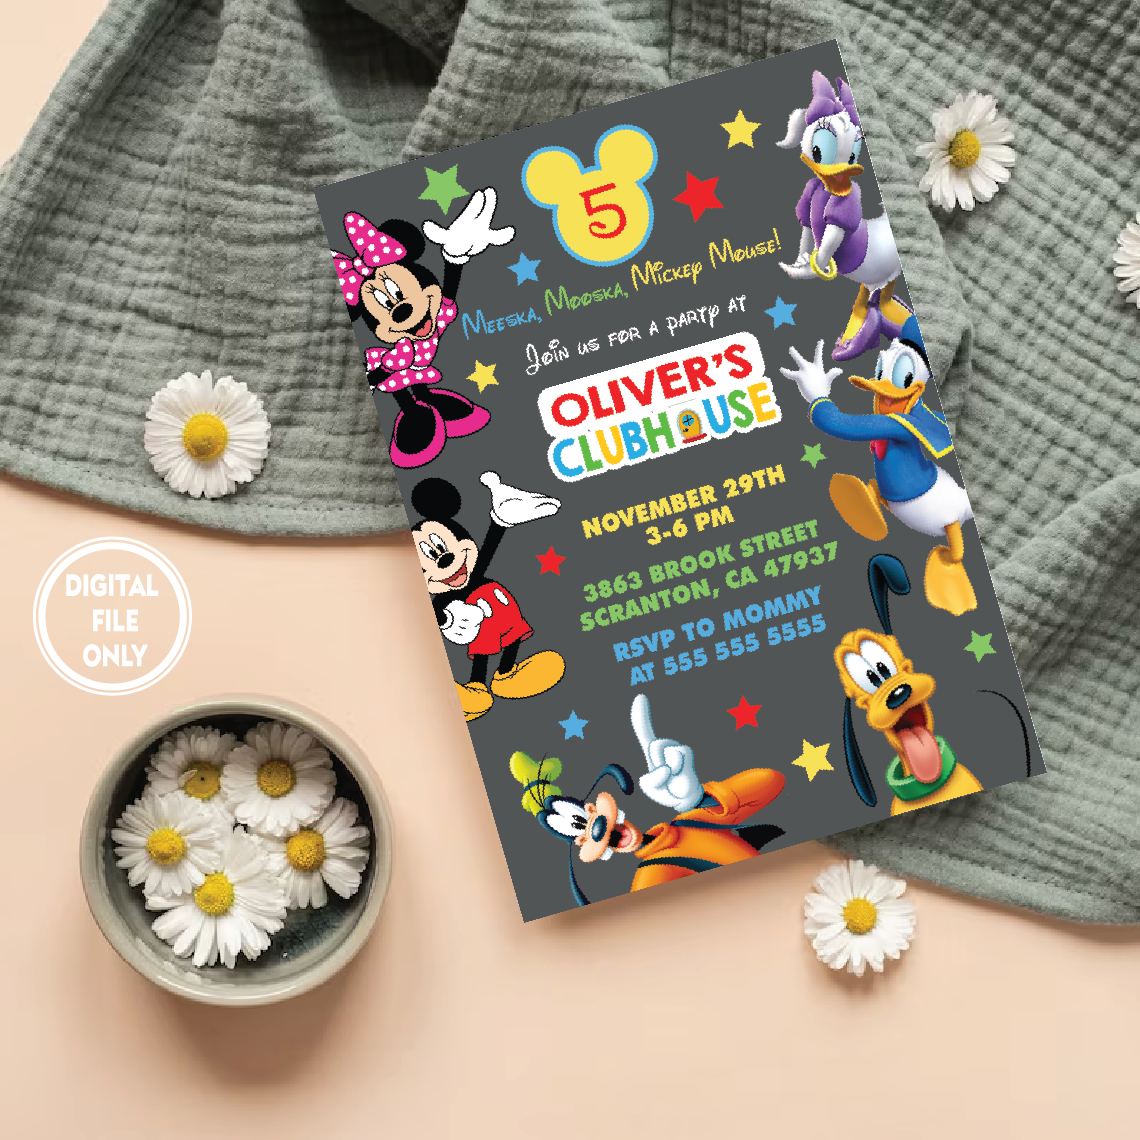 Personalized File Clubhouse Birthday Invitation, Mickey Invitation, Clubhouse Invitation, Mickey Invite, Clubhouse, Thank You Card PNG File Only